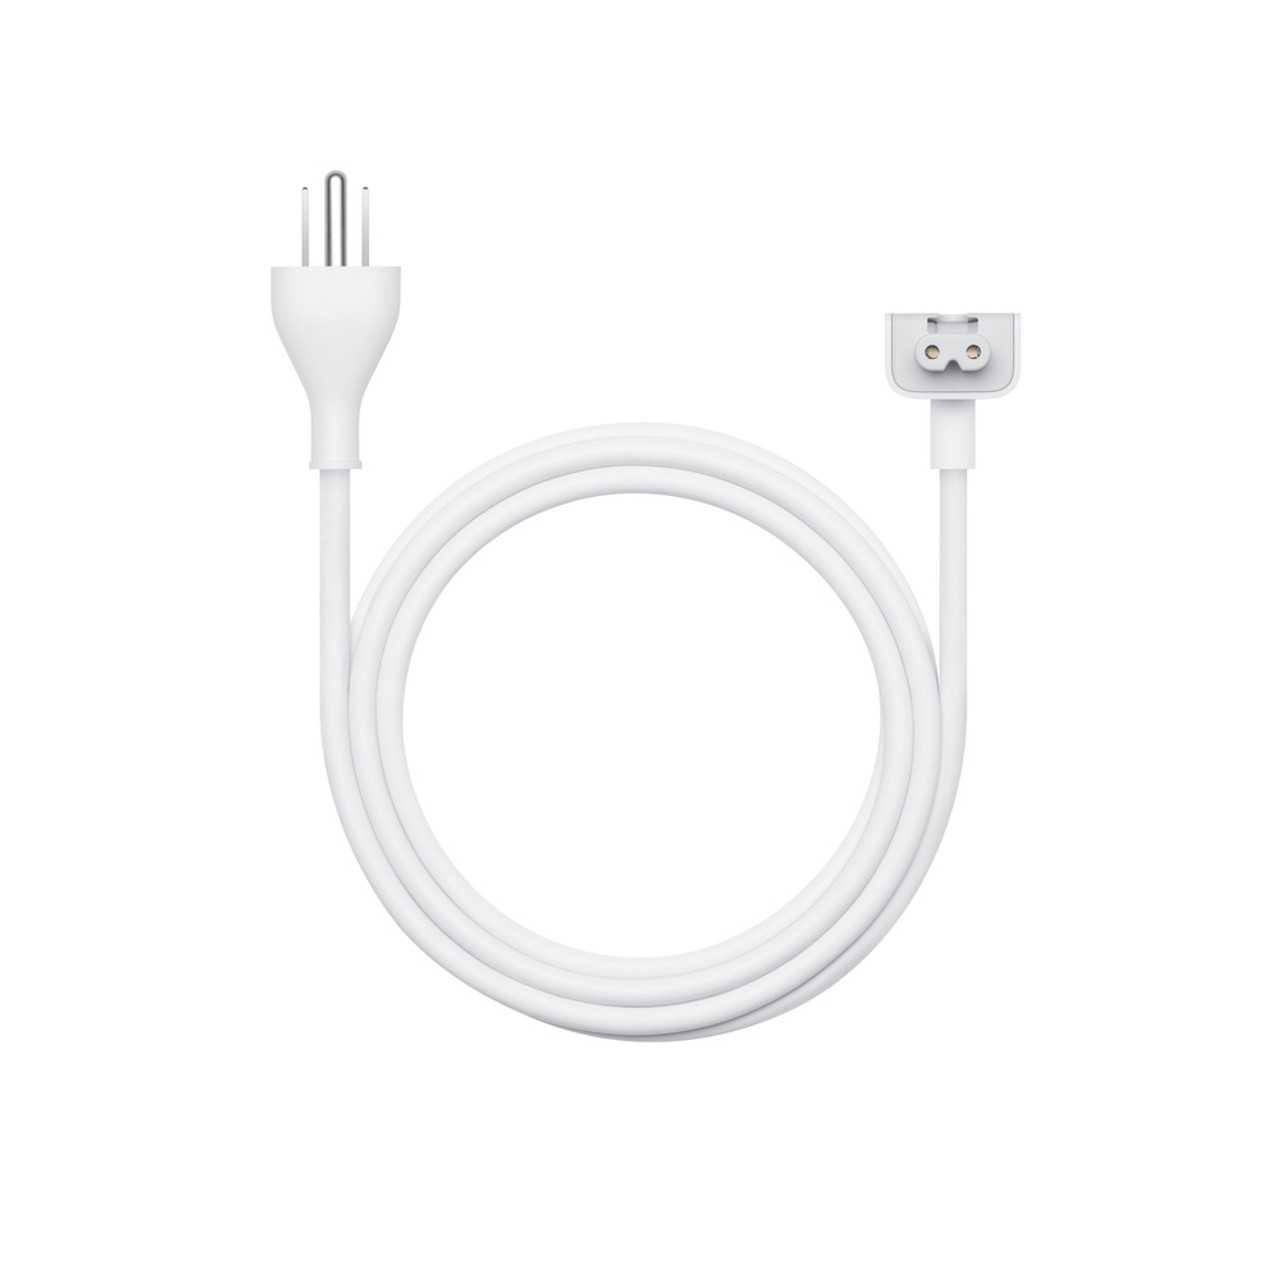 Apple® Power Adapter Extension Cable, MK122LL/A product image